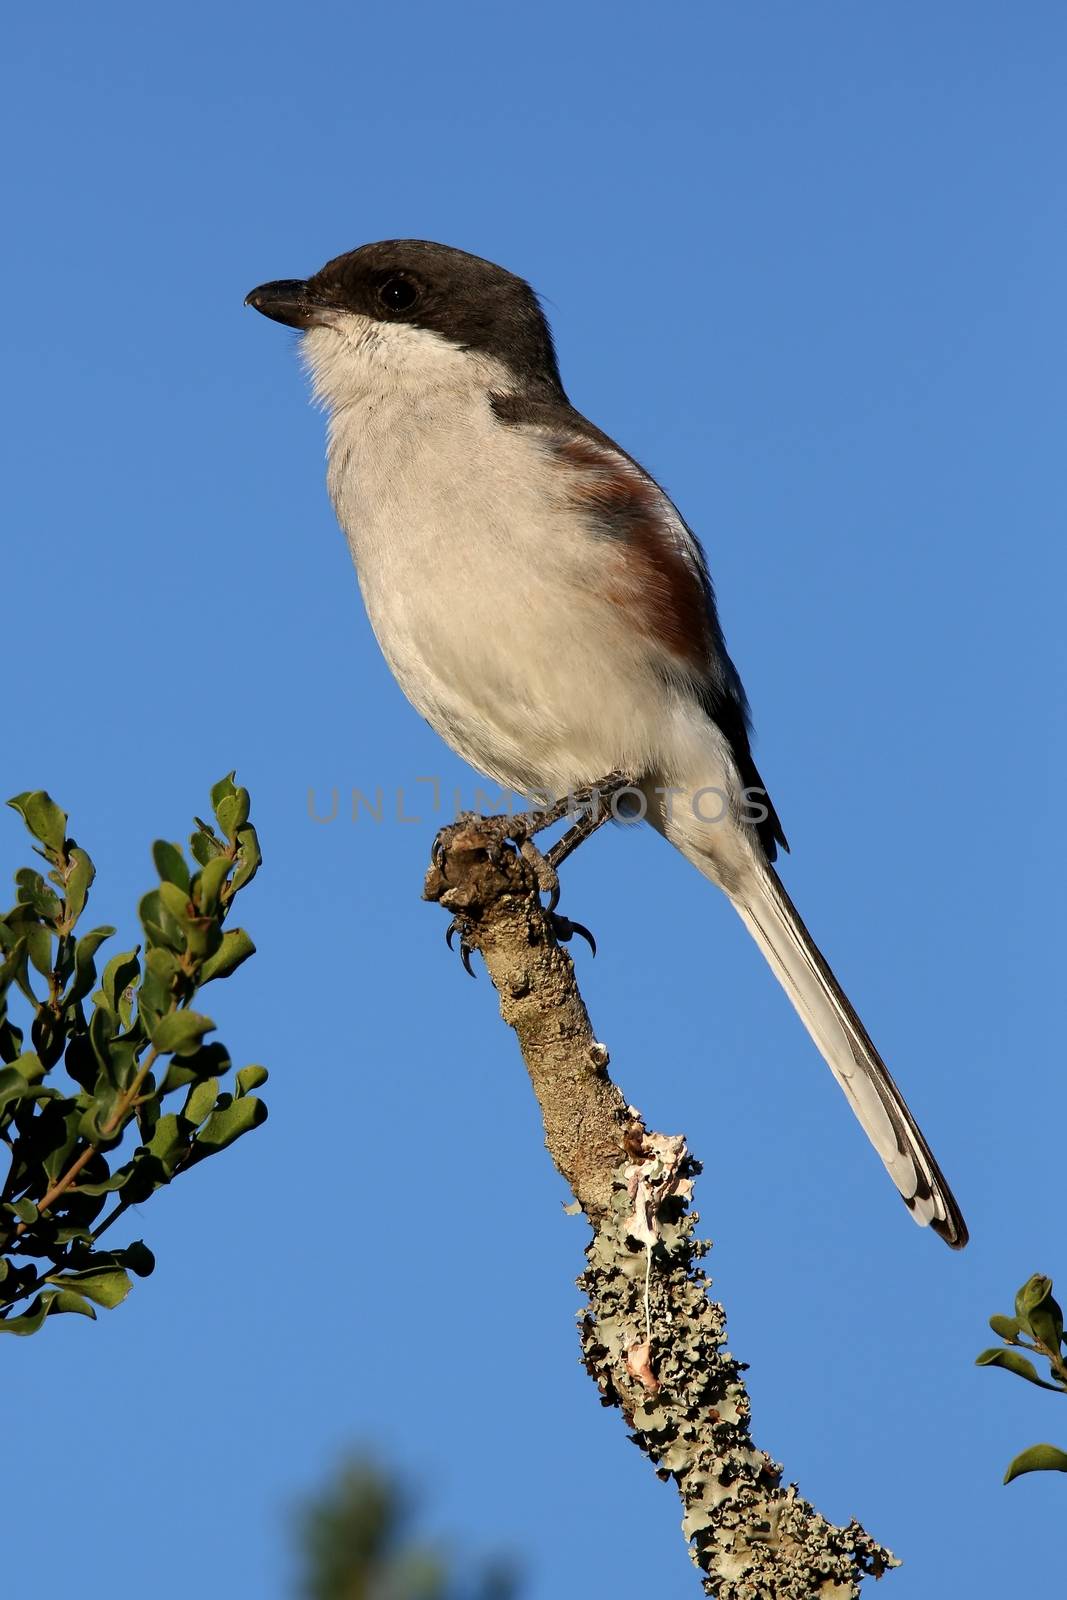 Female Fiscal Shrike bird perched on top of a branch